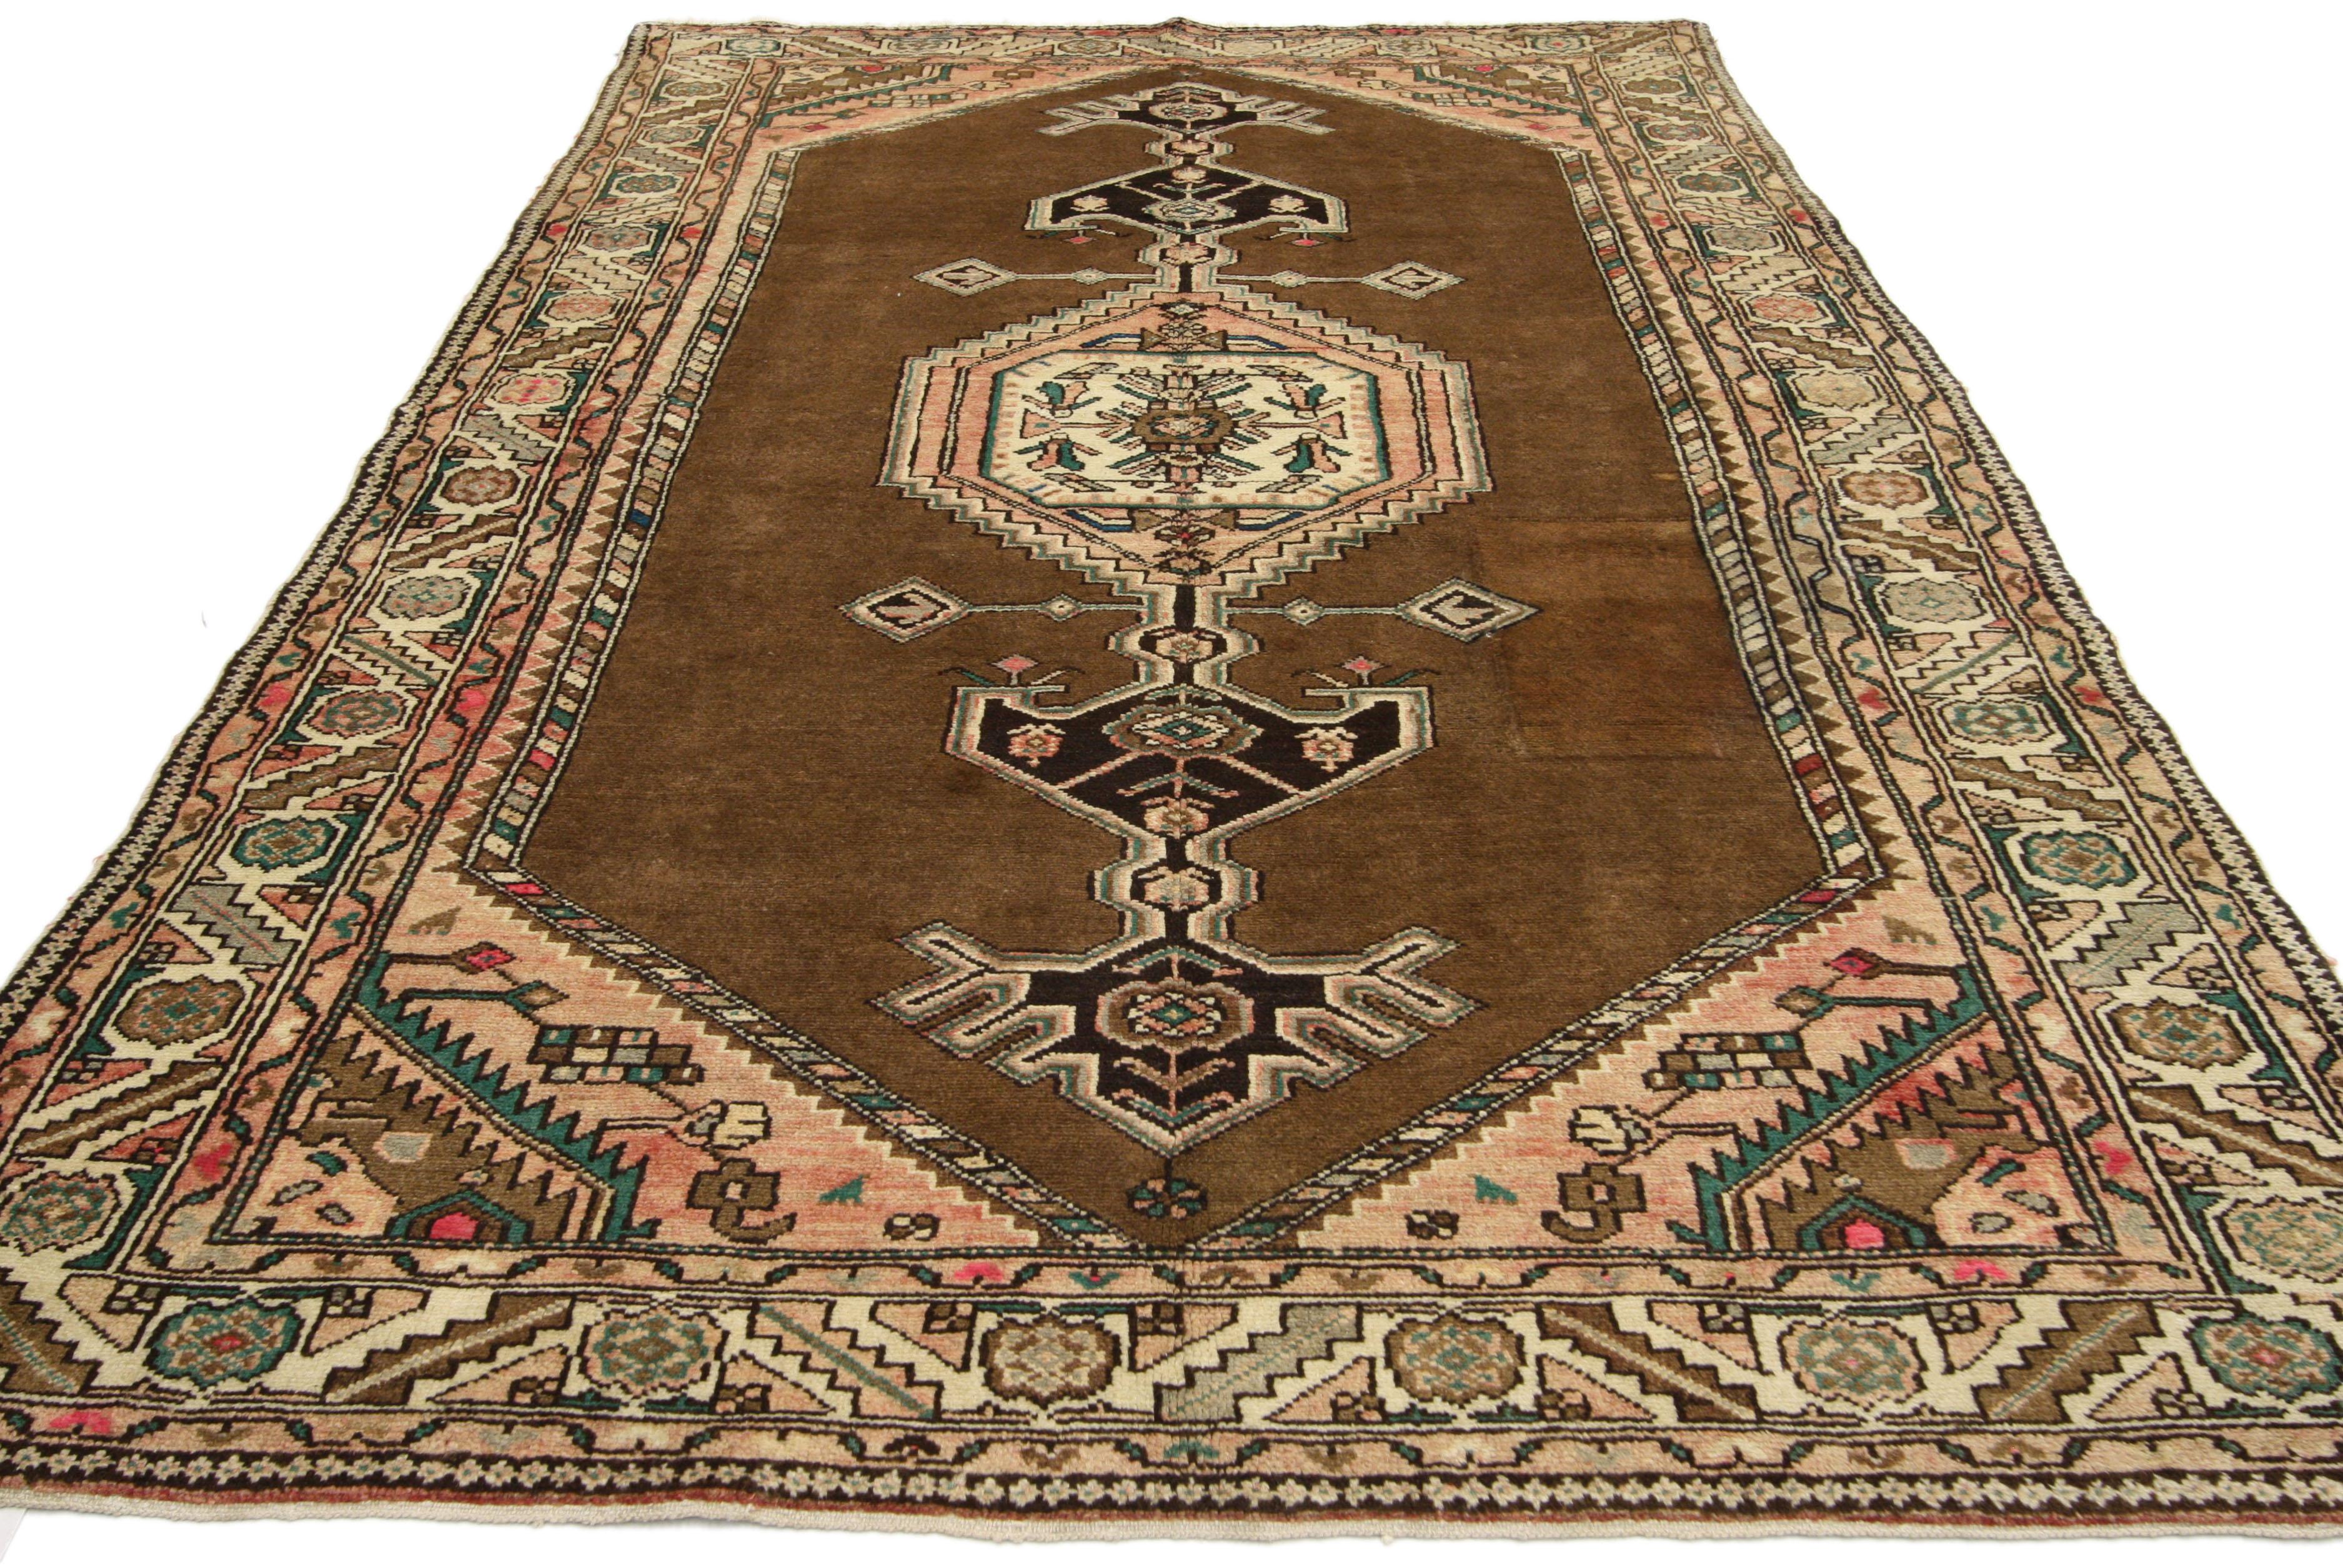 75745 Vintage Nahavand Hamadan Accent rug with Tribal style. Feminine and eclectic, this hand knotted wool vintage Persian Nahavand Hamadan rug features a stepped hexagonal medallion with elaborate pendant end-pieces in brilliant shades of salmon